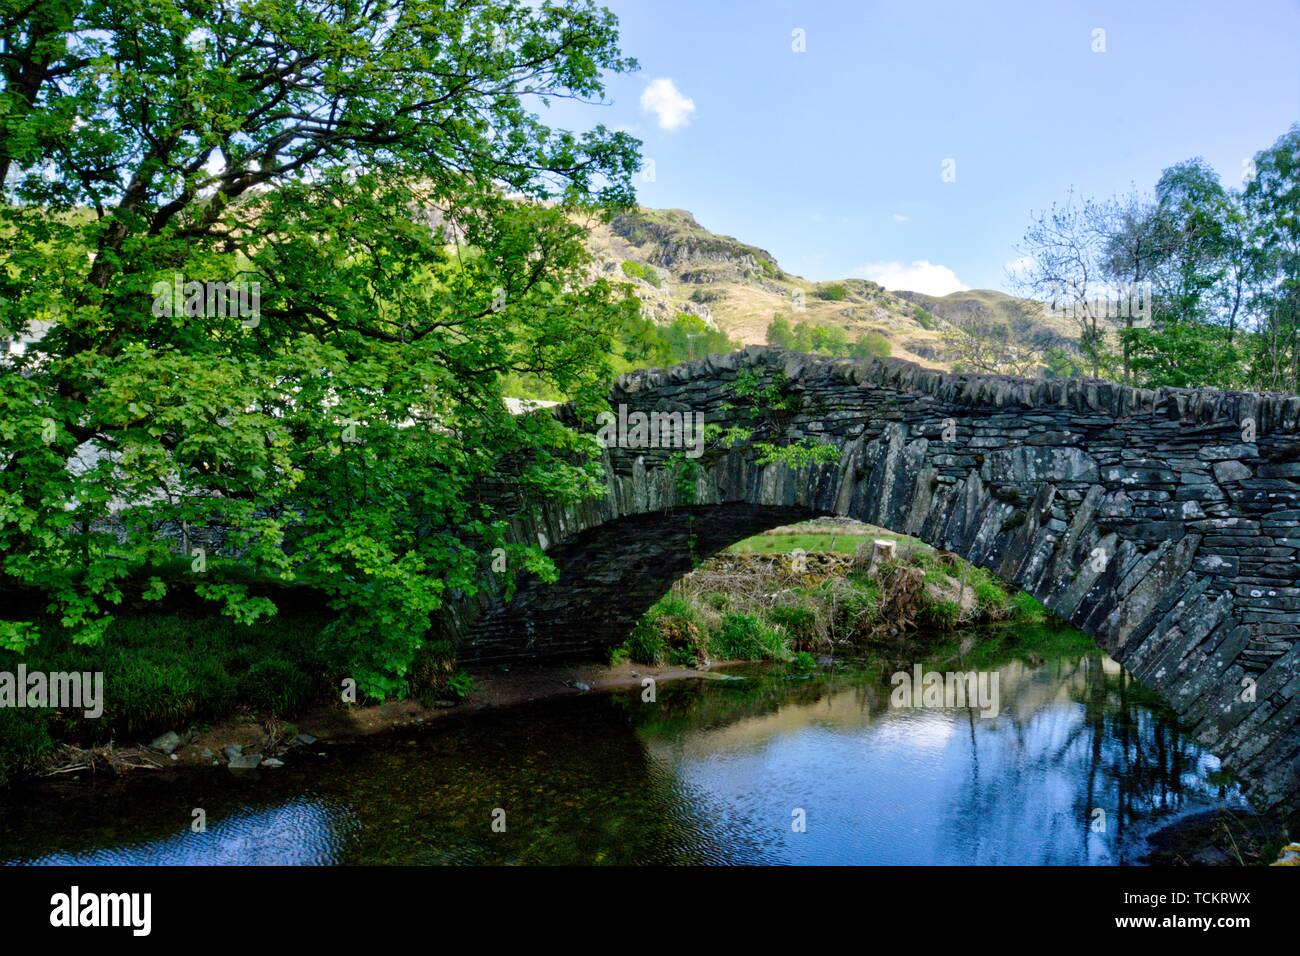 Stone built arch bridge over stream in Langdale in English Lake District in evening sunshine with large boulder in foreground Stock Photo